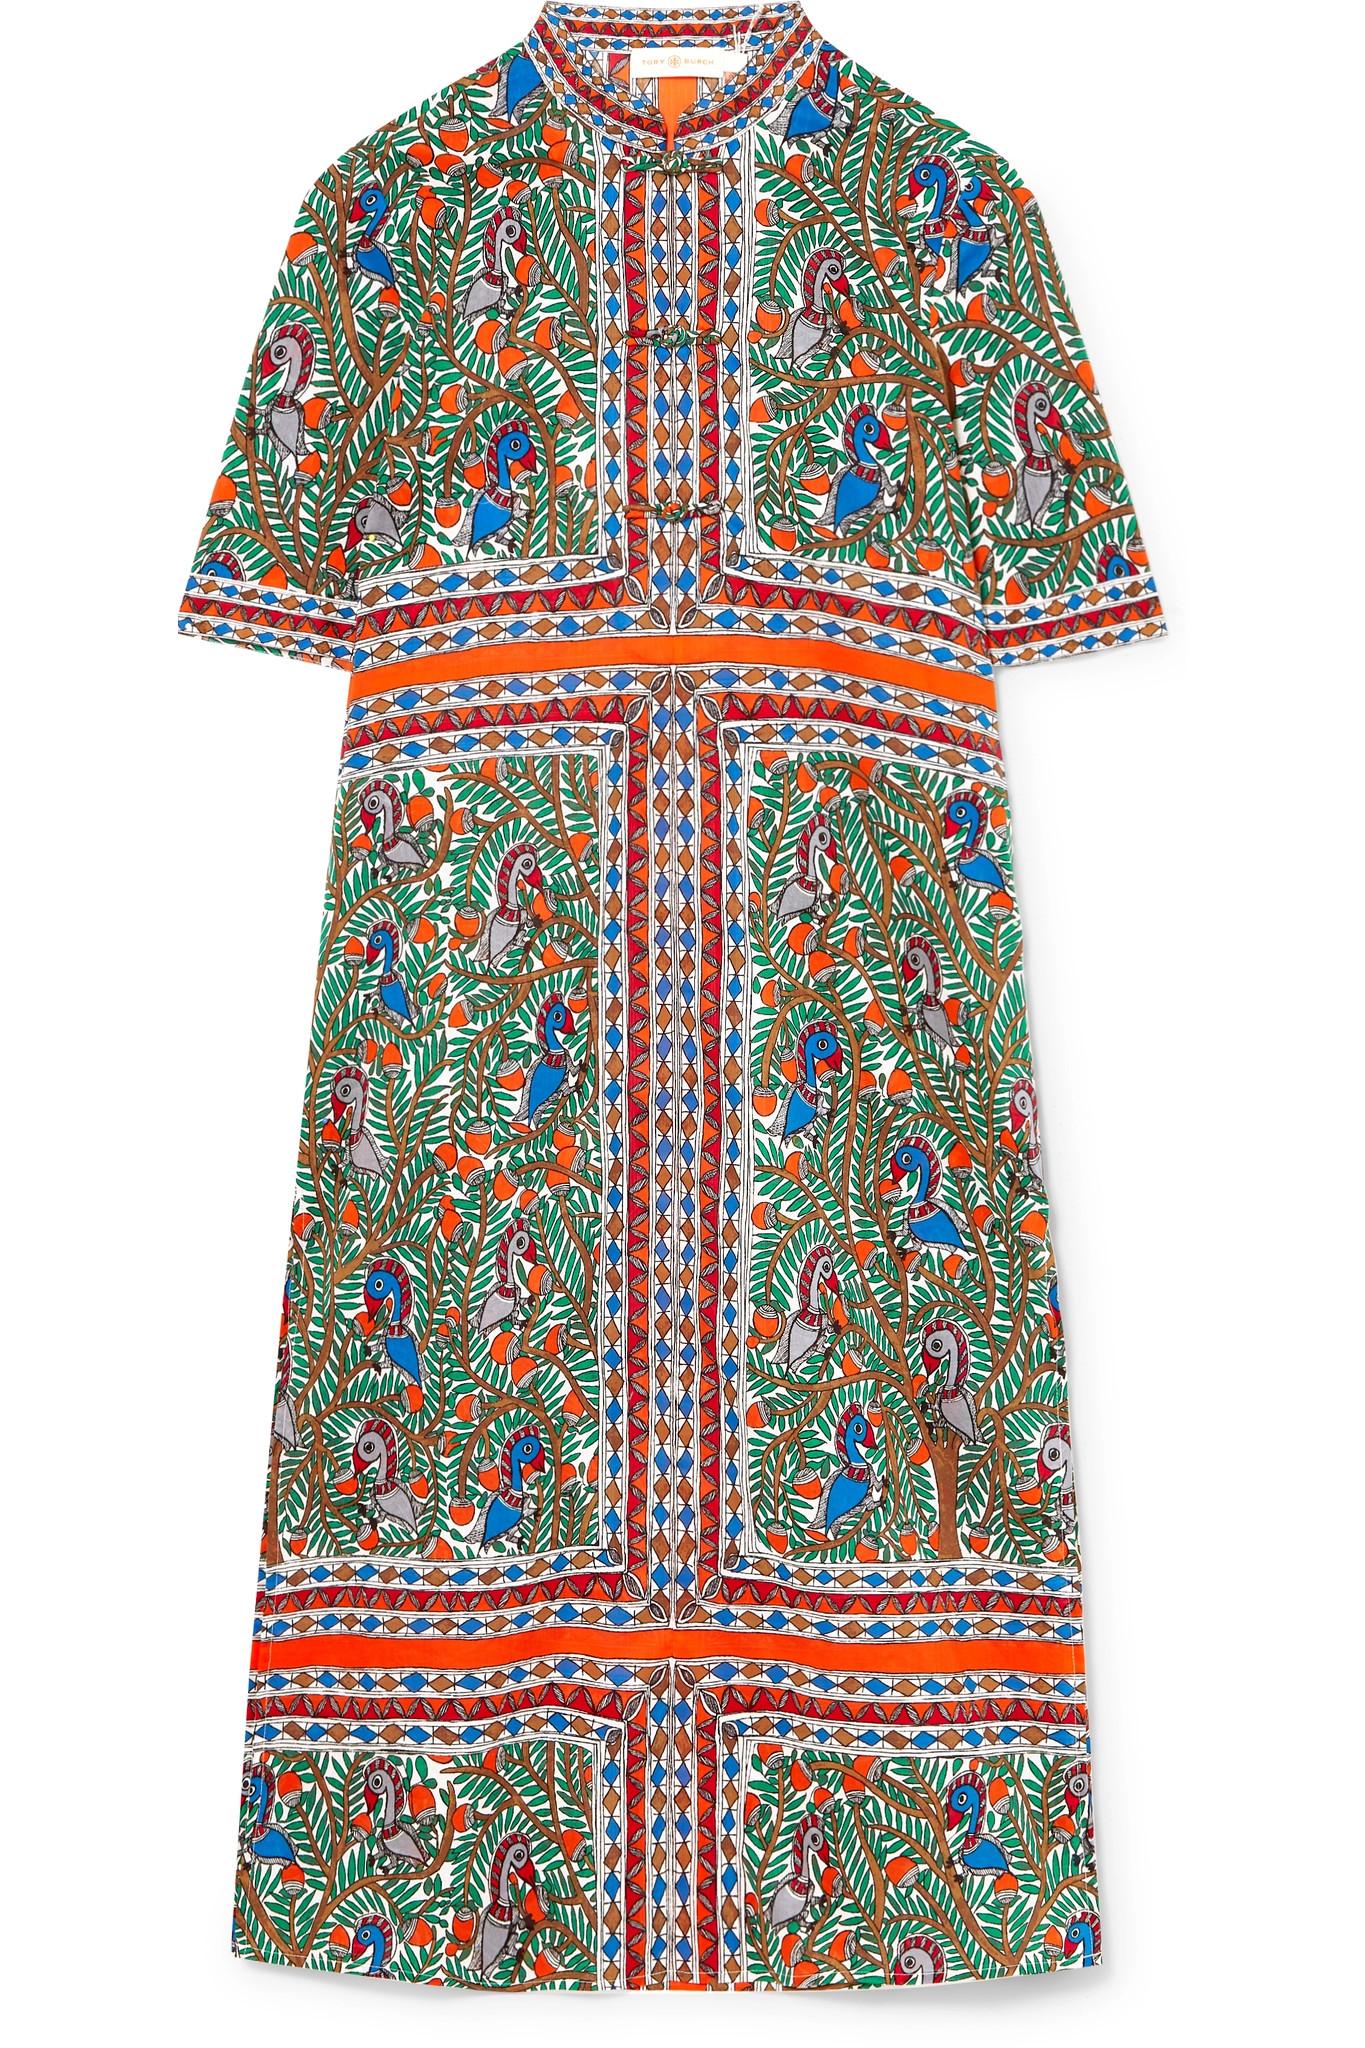 Lyst - Tory Burch Printed Cotton-voile Kaftan in Blue